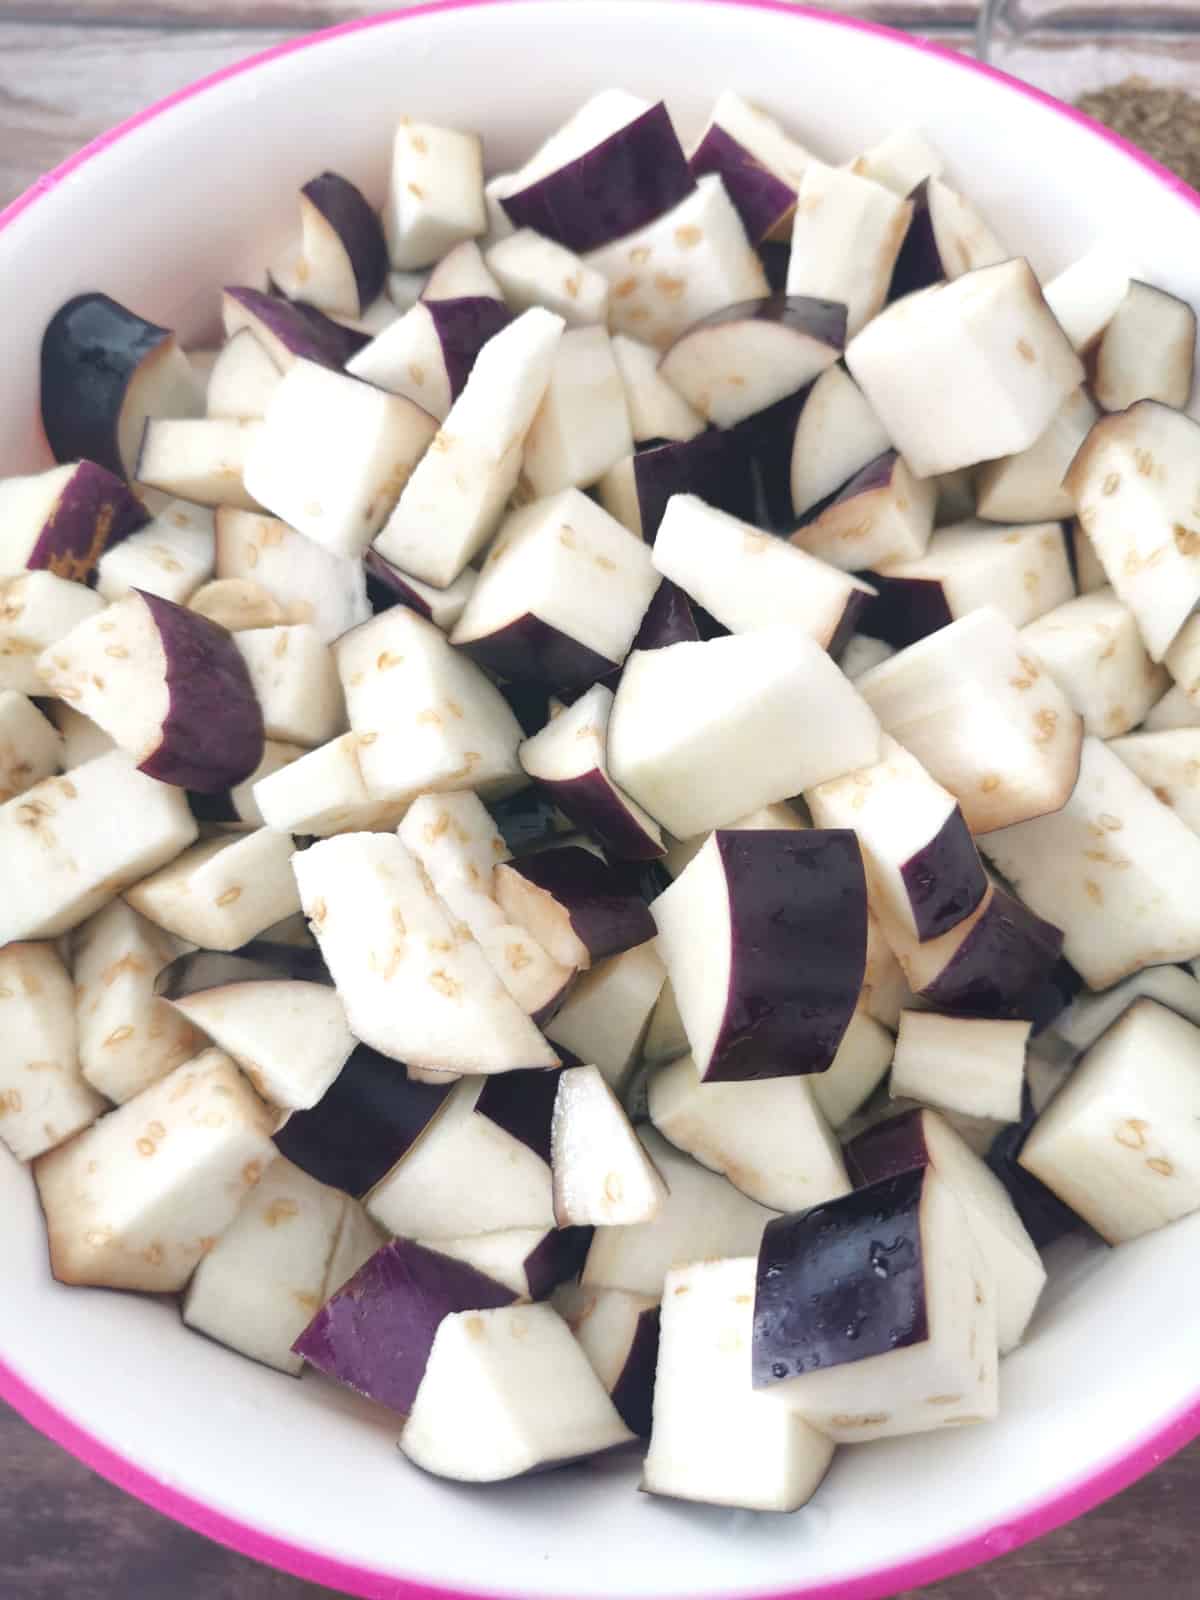 diced eggplant seasoned with salt, drizzled in lemon juice, in large mixing bowl